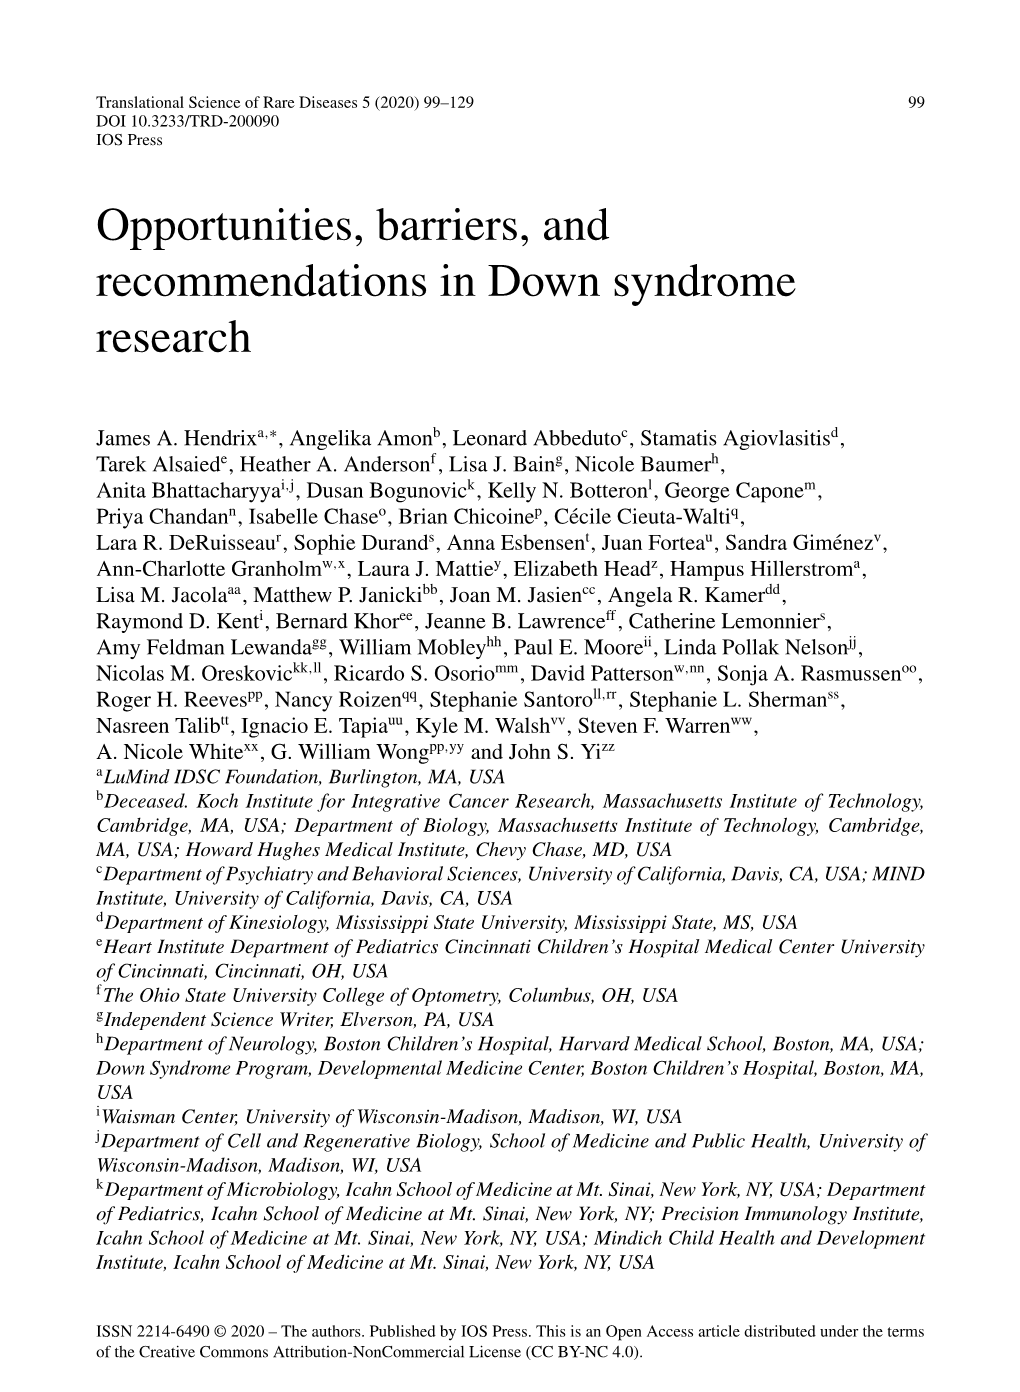 Opportunities, Barriers, and Recommendations in Down Syndrome Research